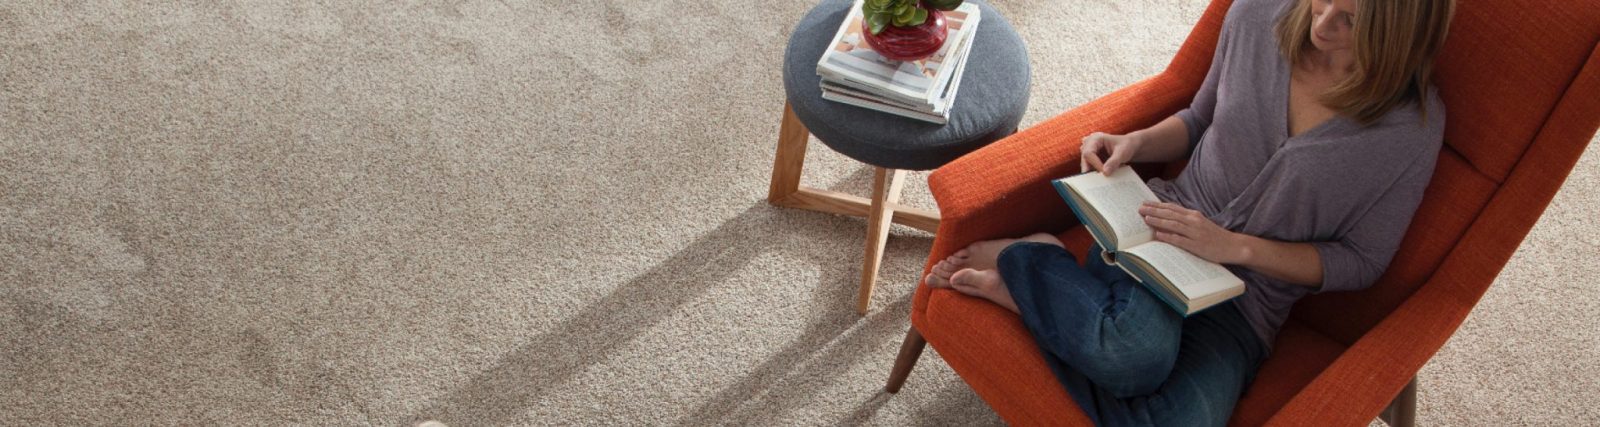 Carpeting Color Your World With Comfort Flooring Depot Of Panama City